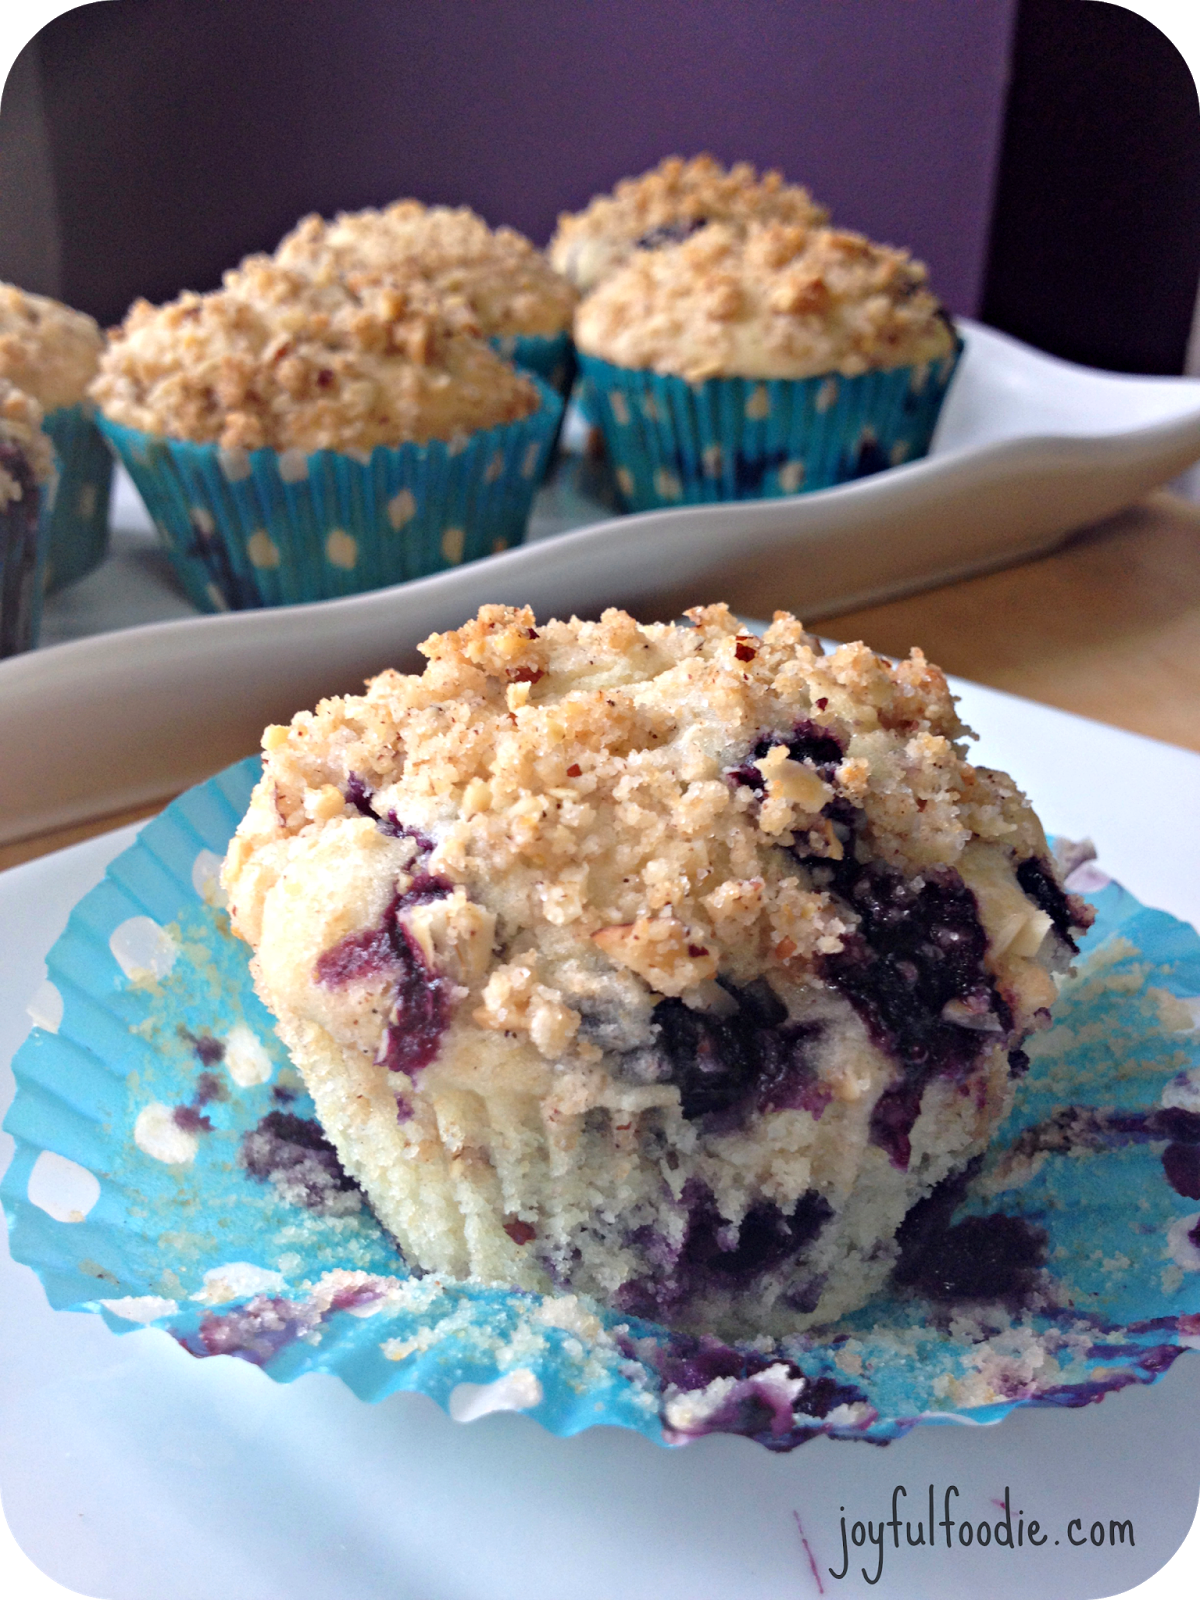 Joyful foodie blueberry muffins with streusel topping